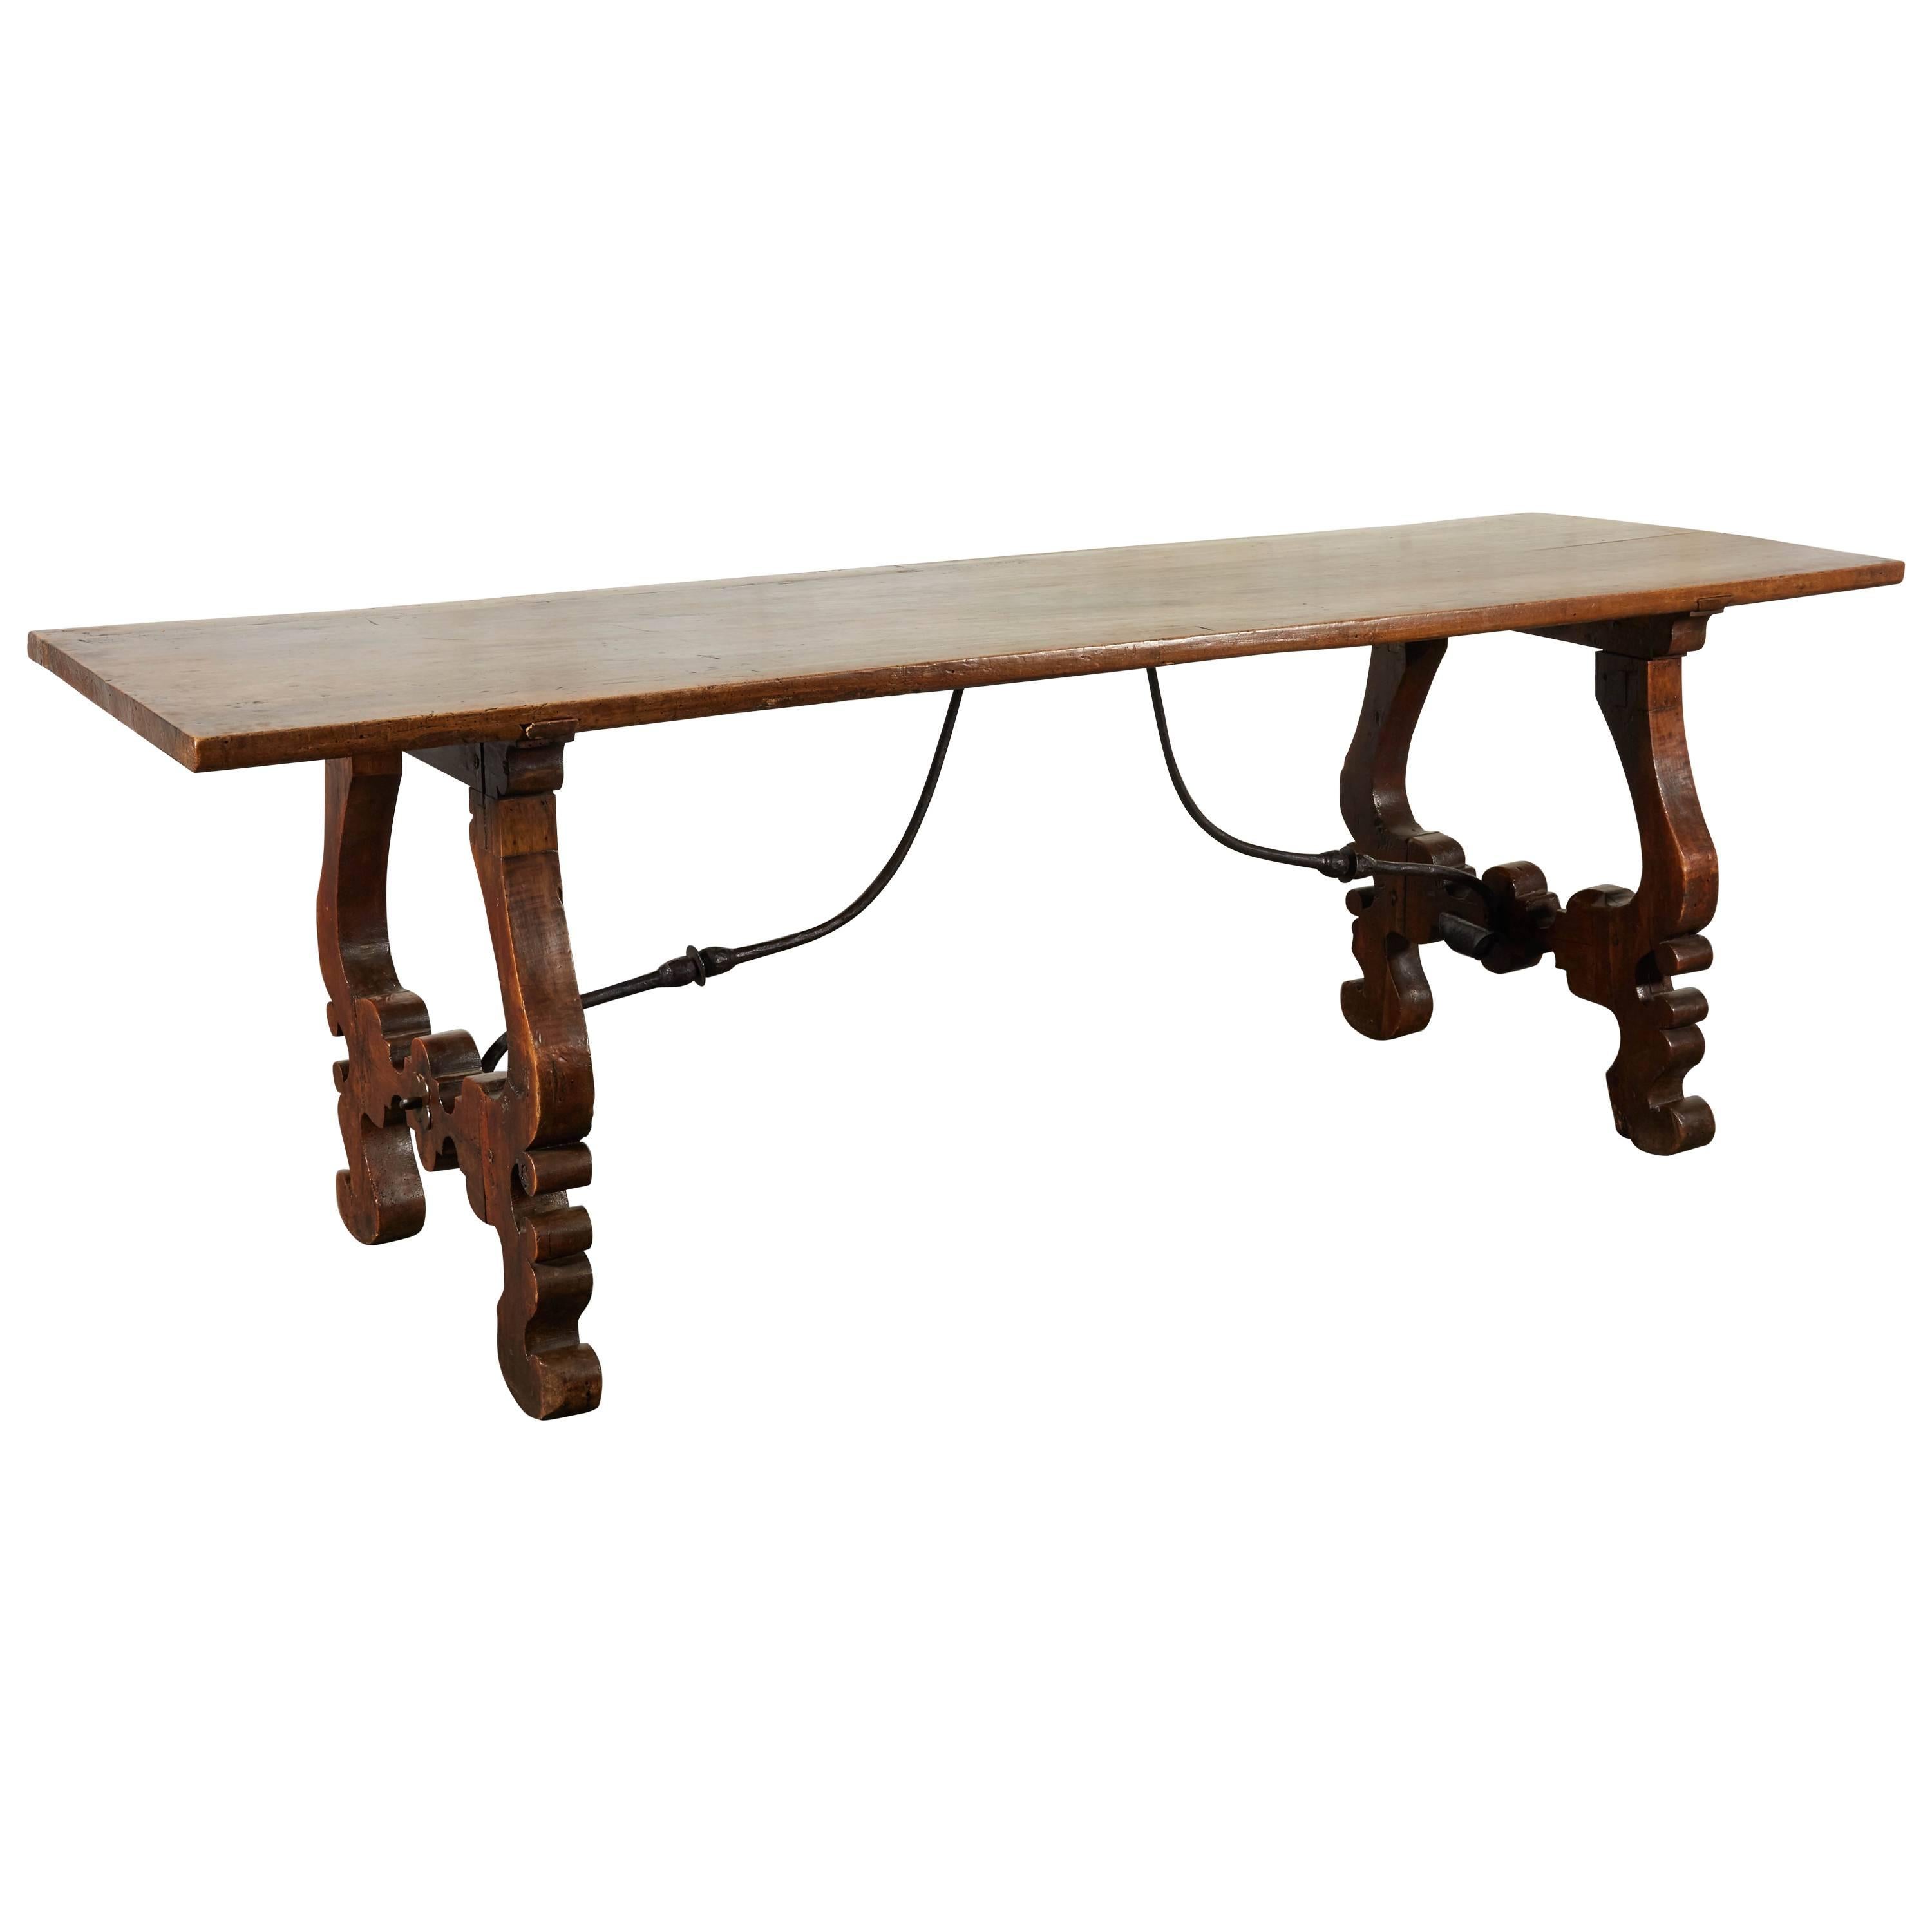 Spanish Baroque Walnut and Wrought-Iron Refectory Table